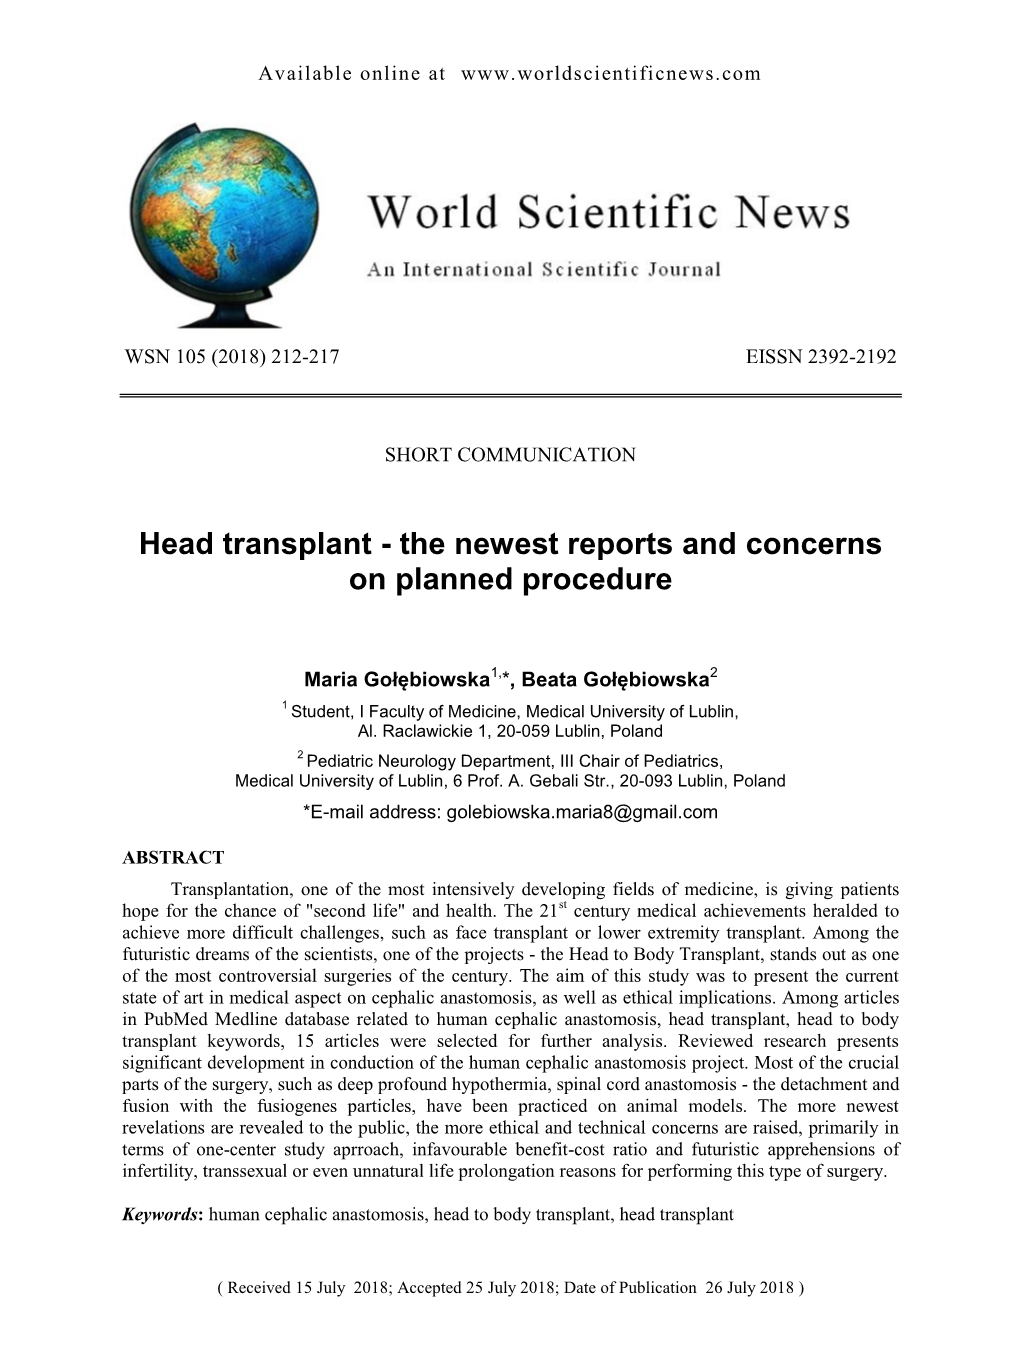 Head Transplant - the Newest Reports and Concerns on Planned Procedure